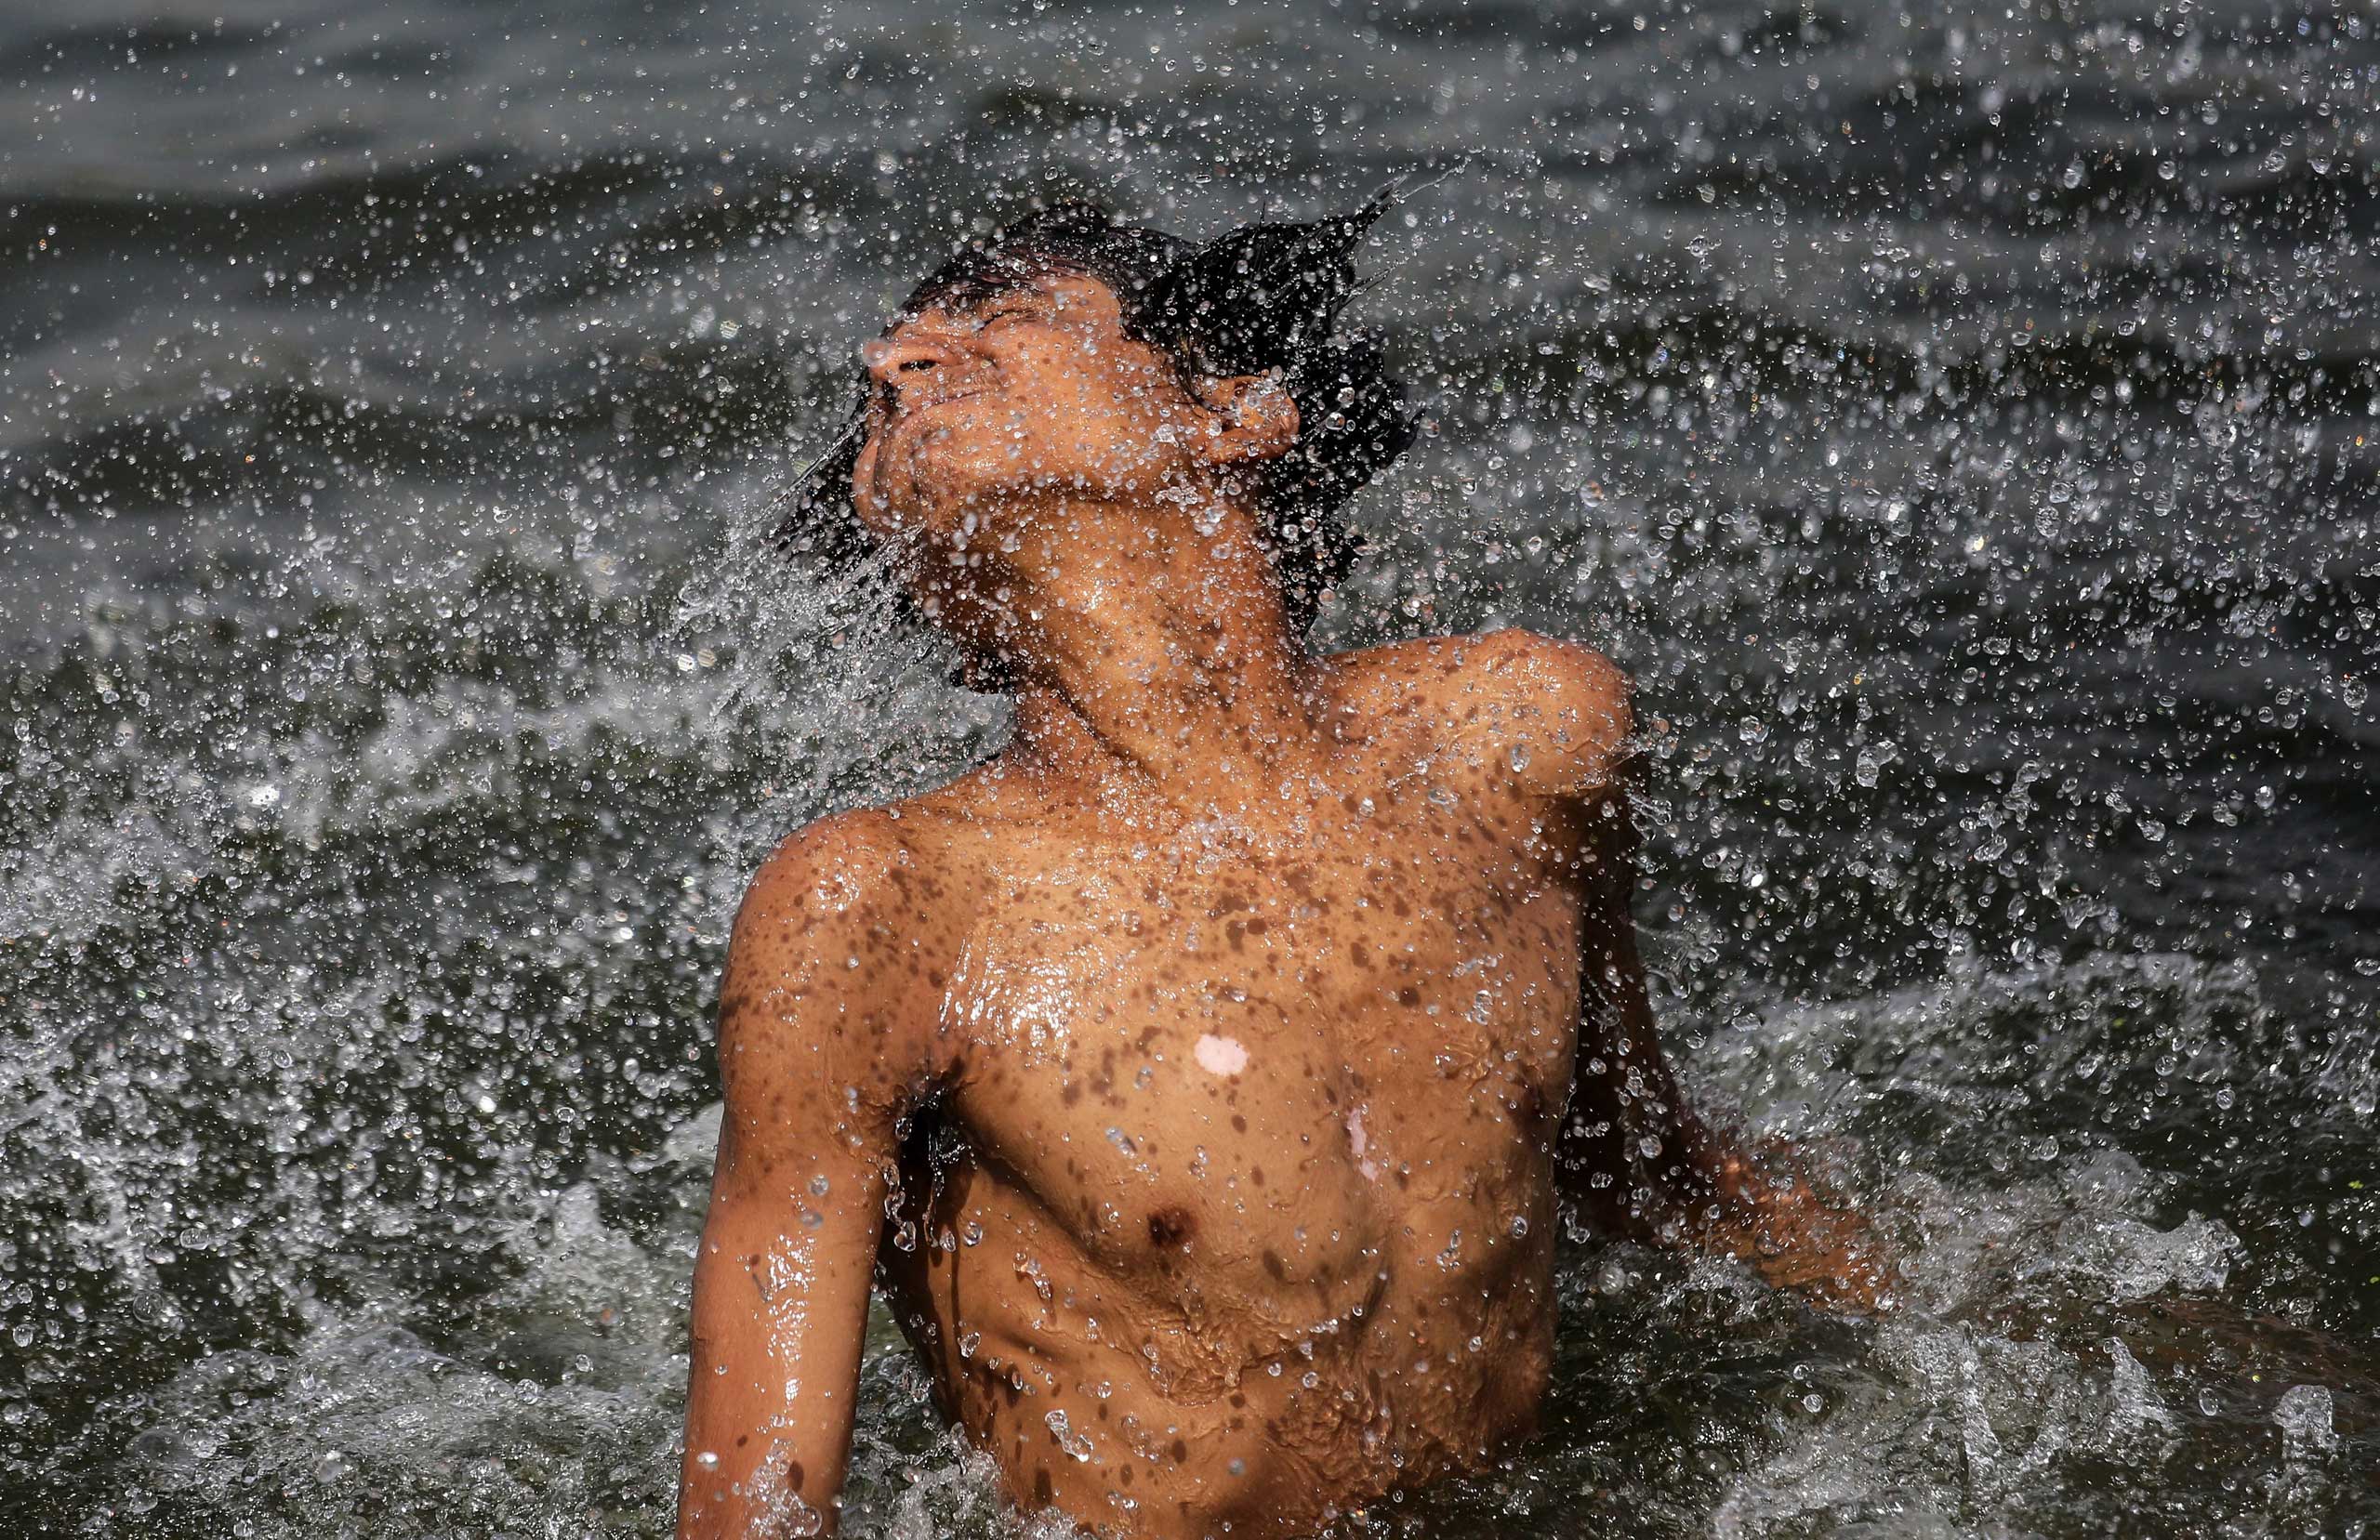 A youth frolics in the Sabarmati river as he cools himself off on a hot afternoon in Ahmedabad, India on May 26, 2015.